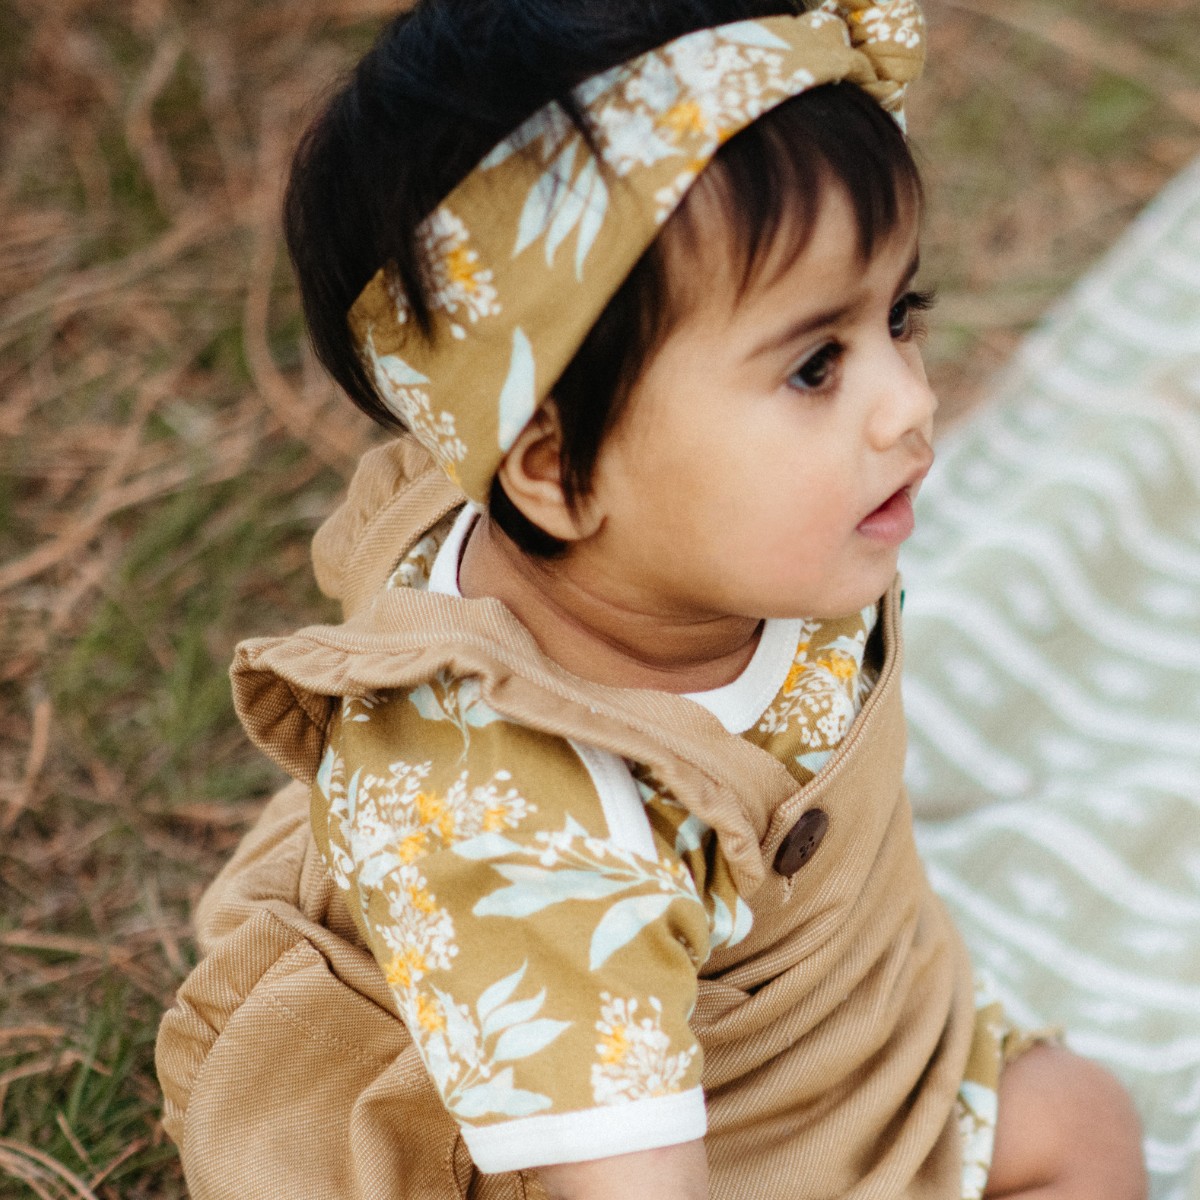 Baby girl sitting on a picnic blanket wearing the Gold Floral organic cotton Knotted Headband by Milkbarn